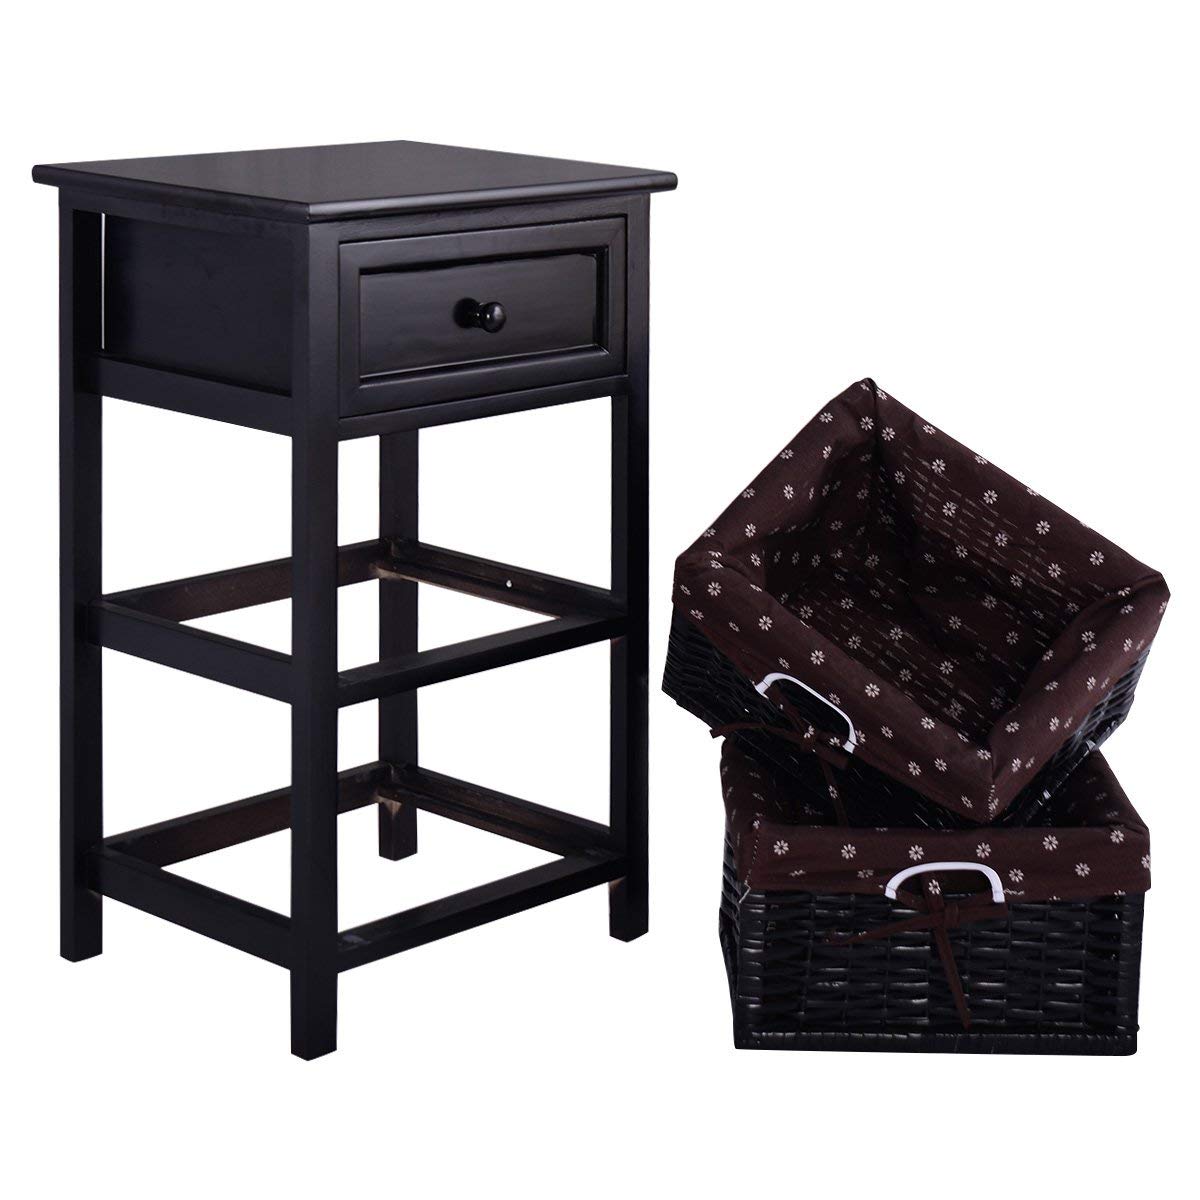 Giantex Wooden Nightstand 3 Tiers W/ 2 Baskets and 1 Drawer Bedside Sofa Storage Organizer